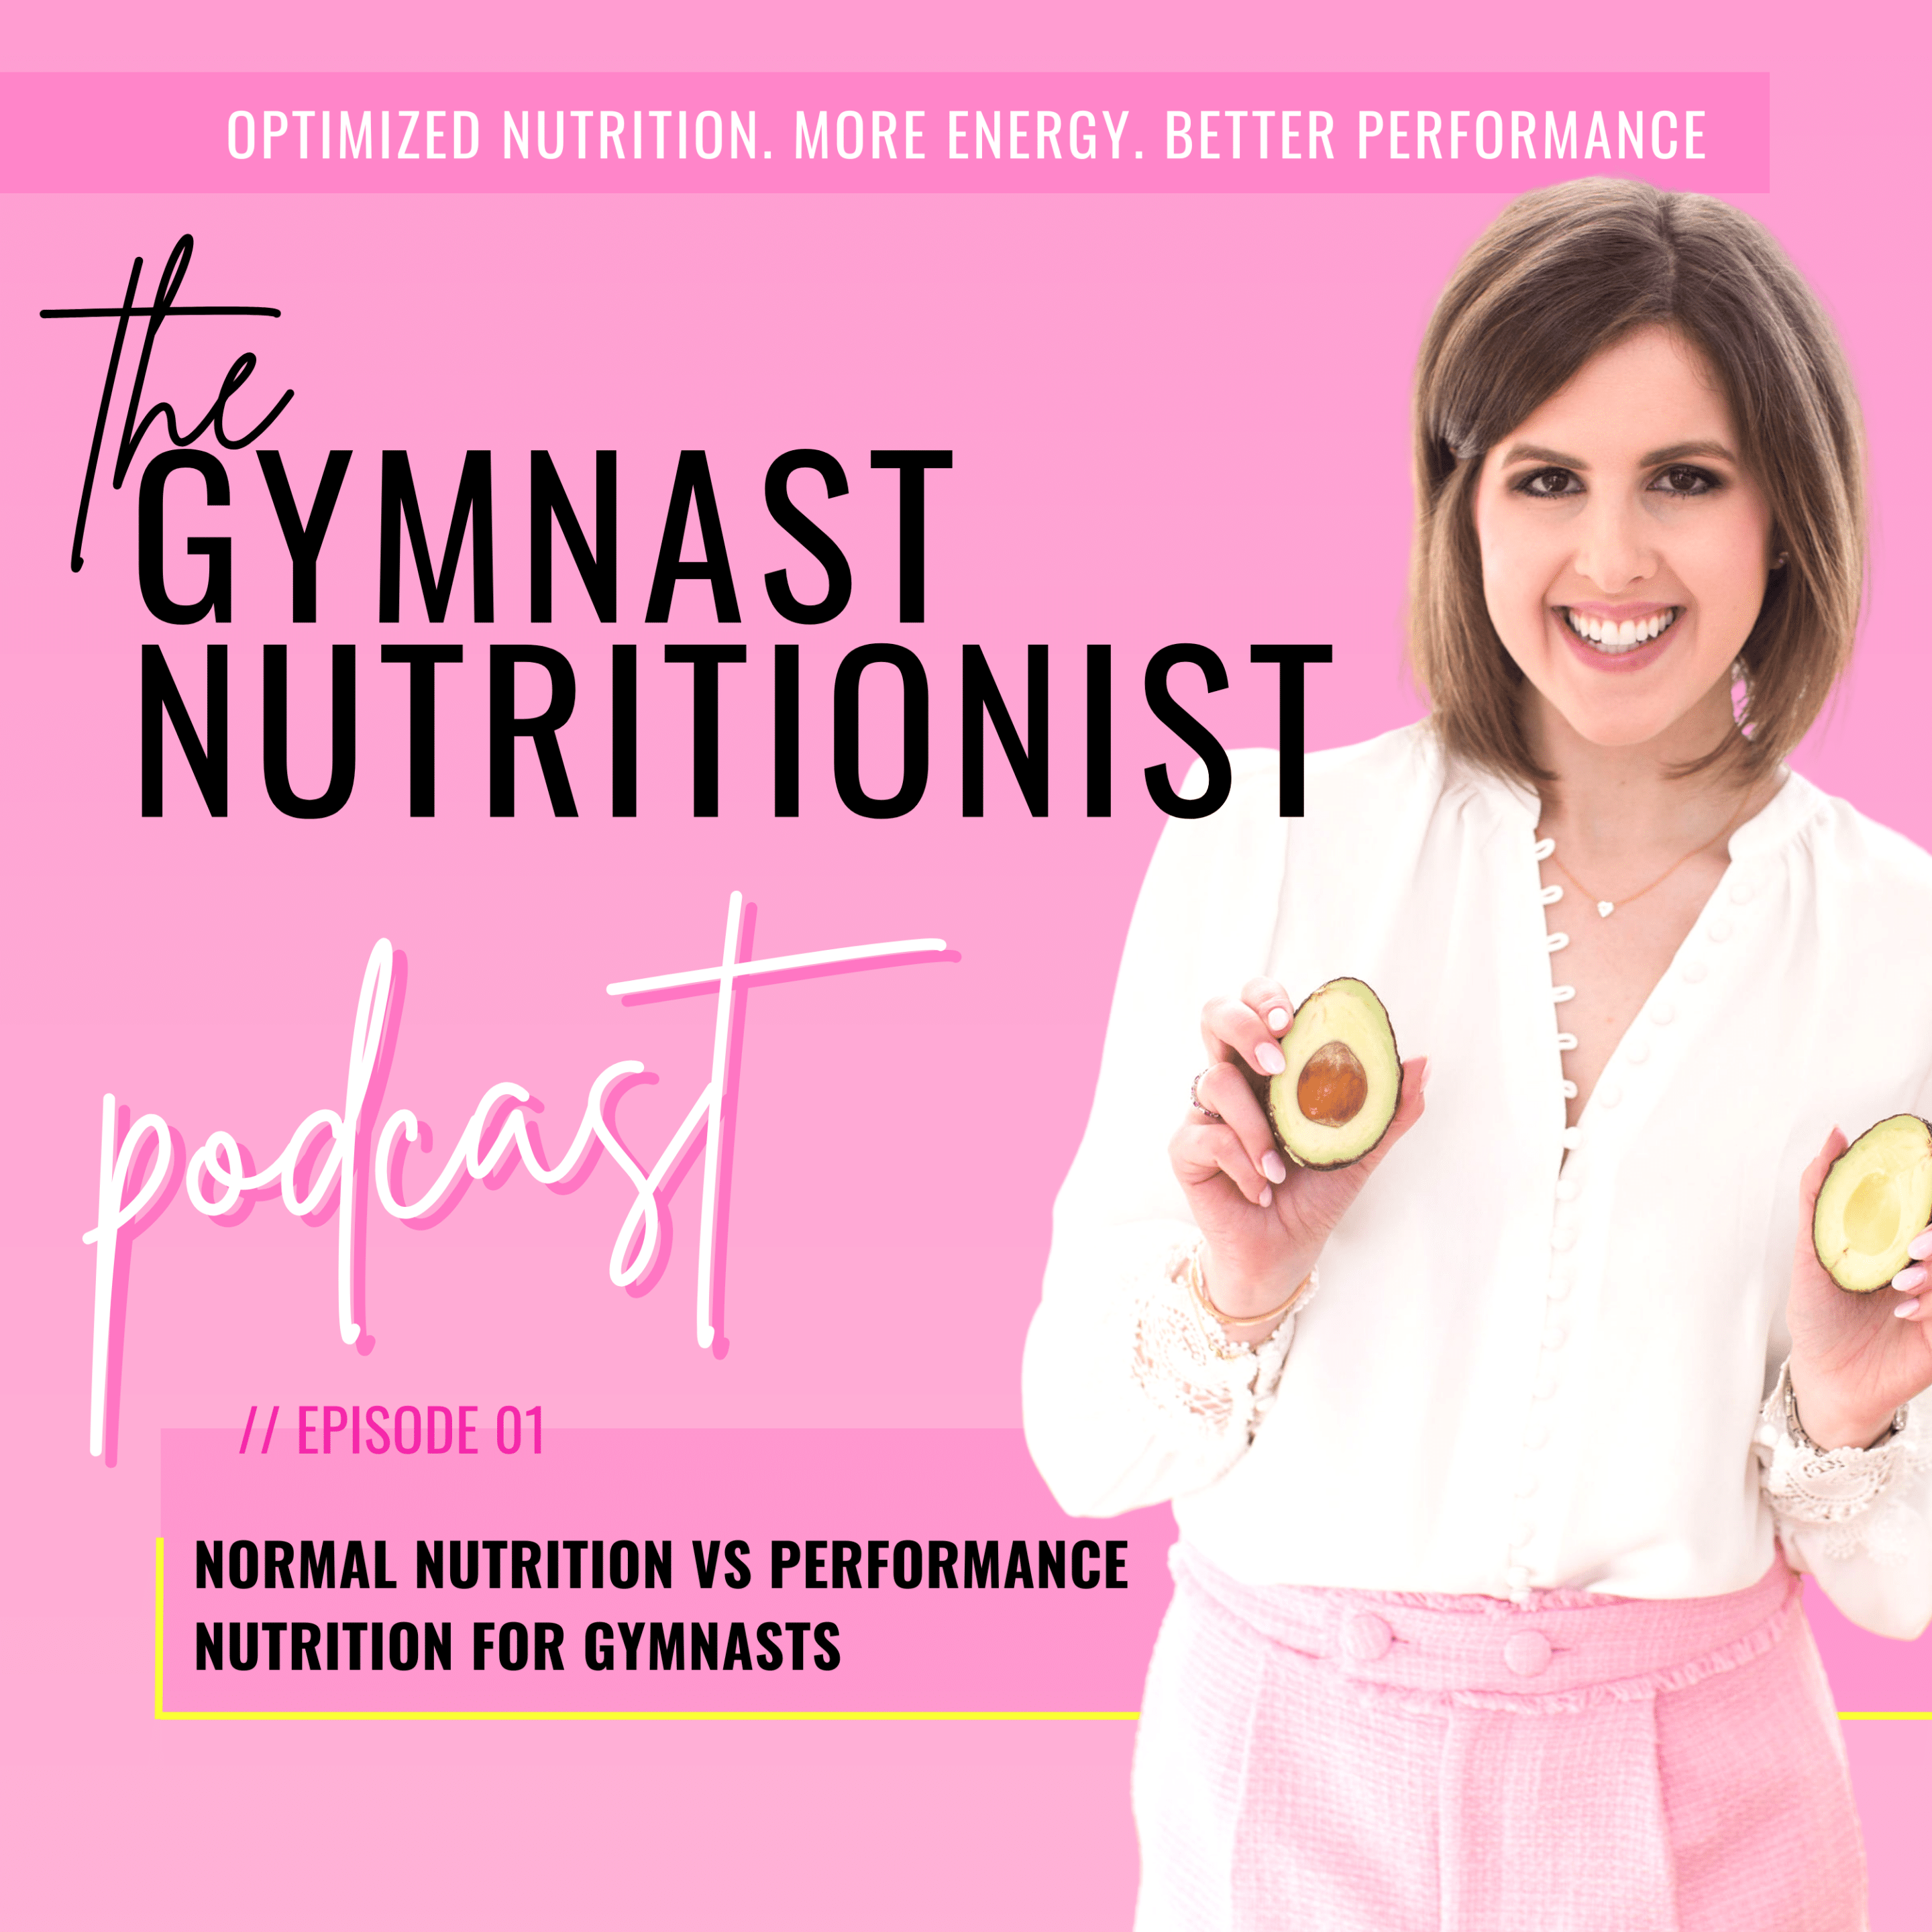 Episode 01: Normal Nutrition vs Performance Nutrition for Gymnasts